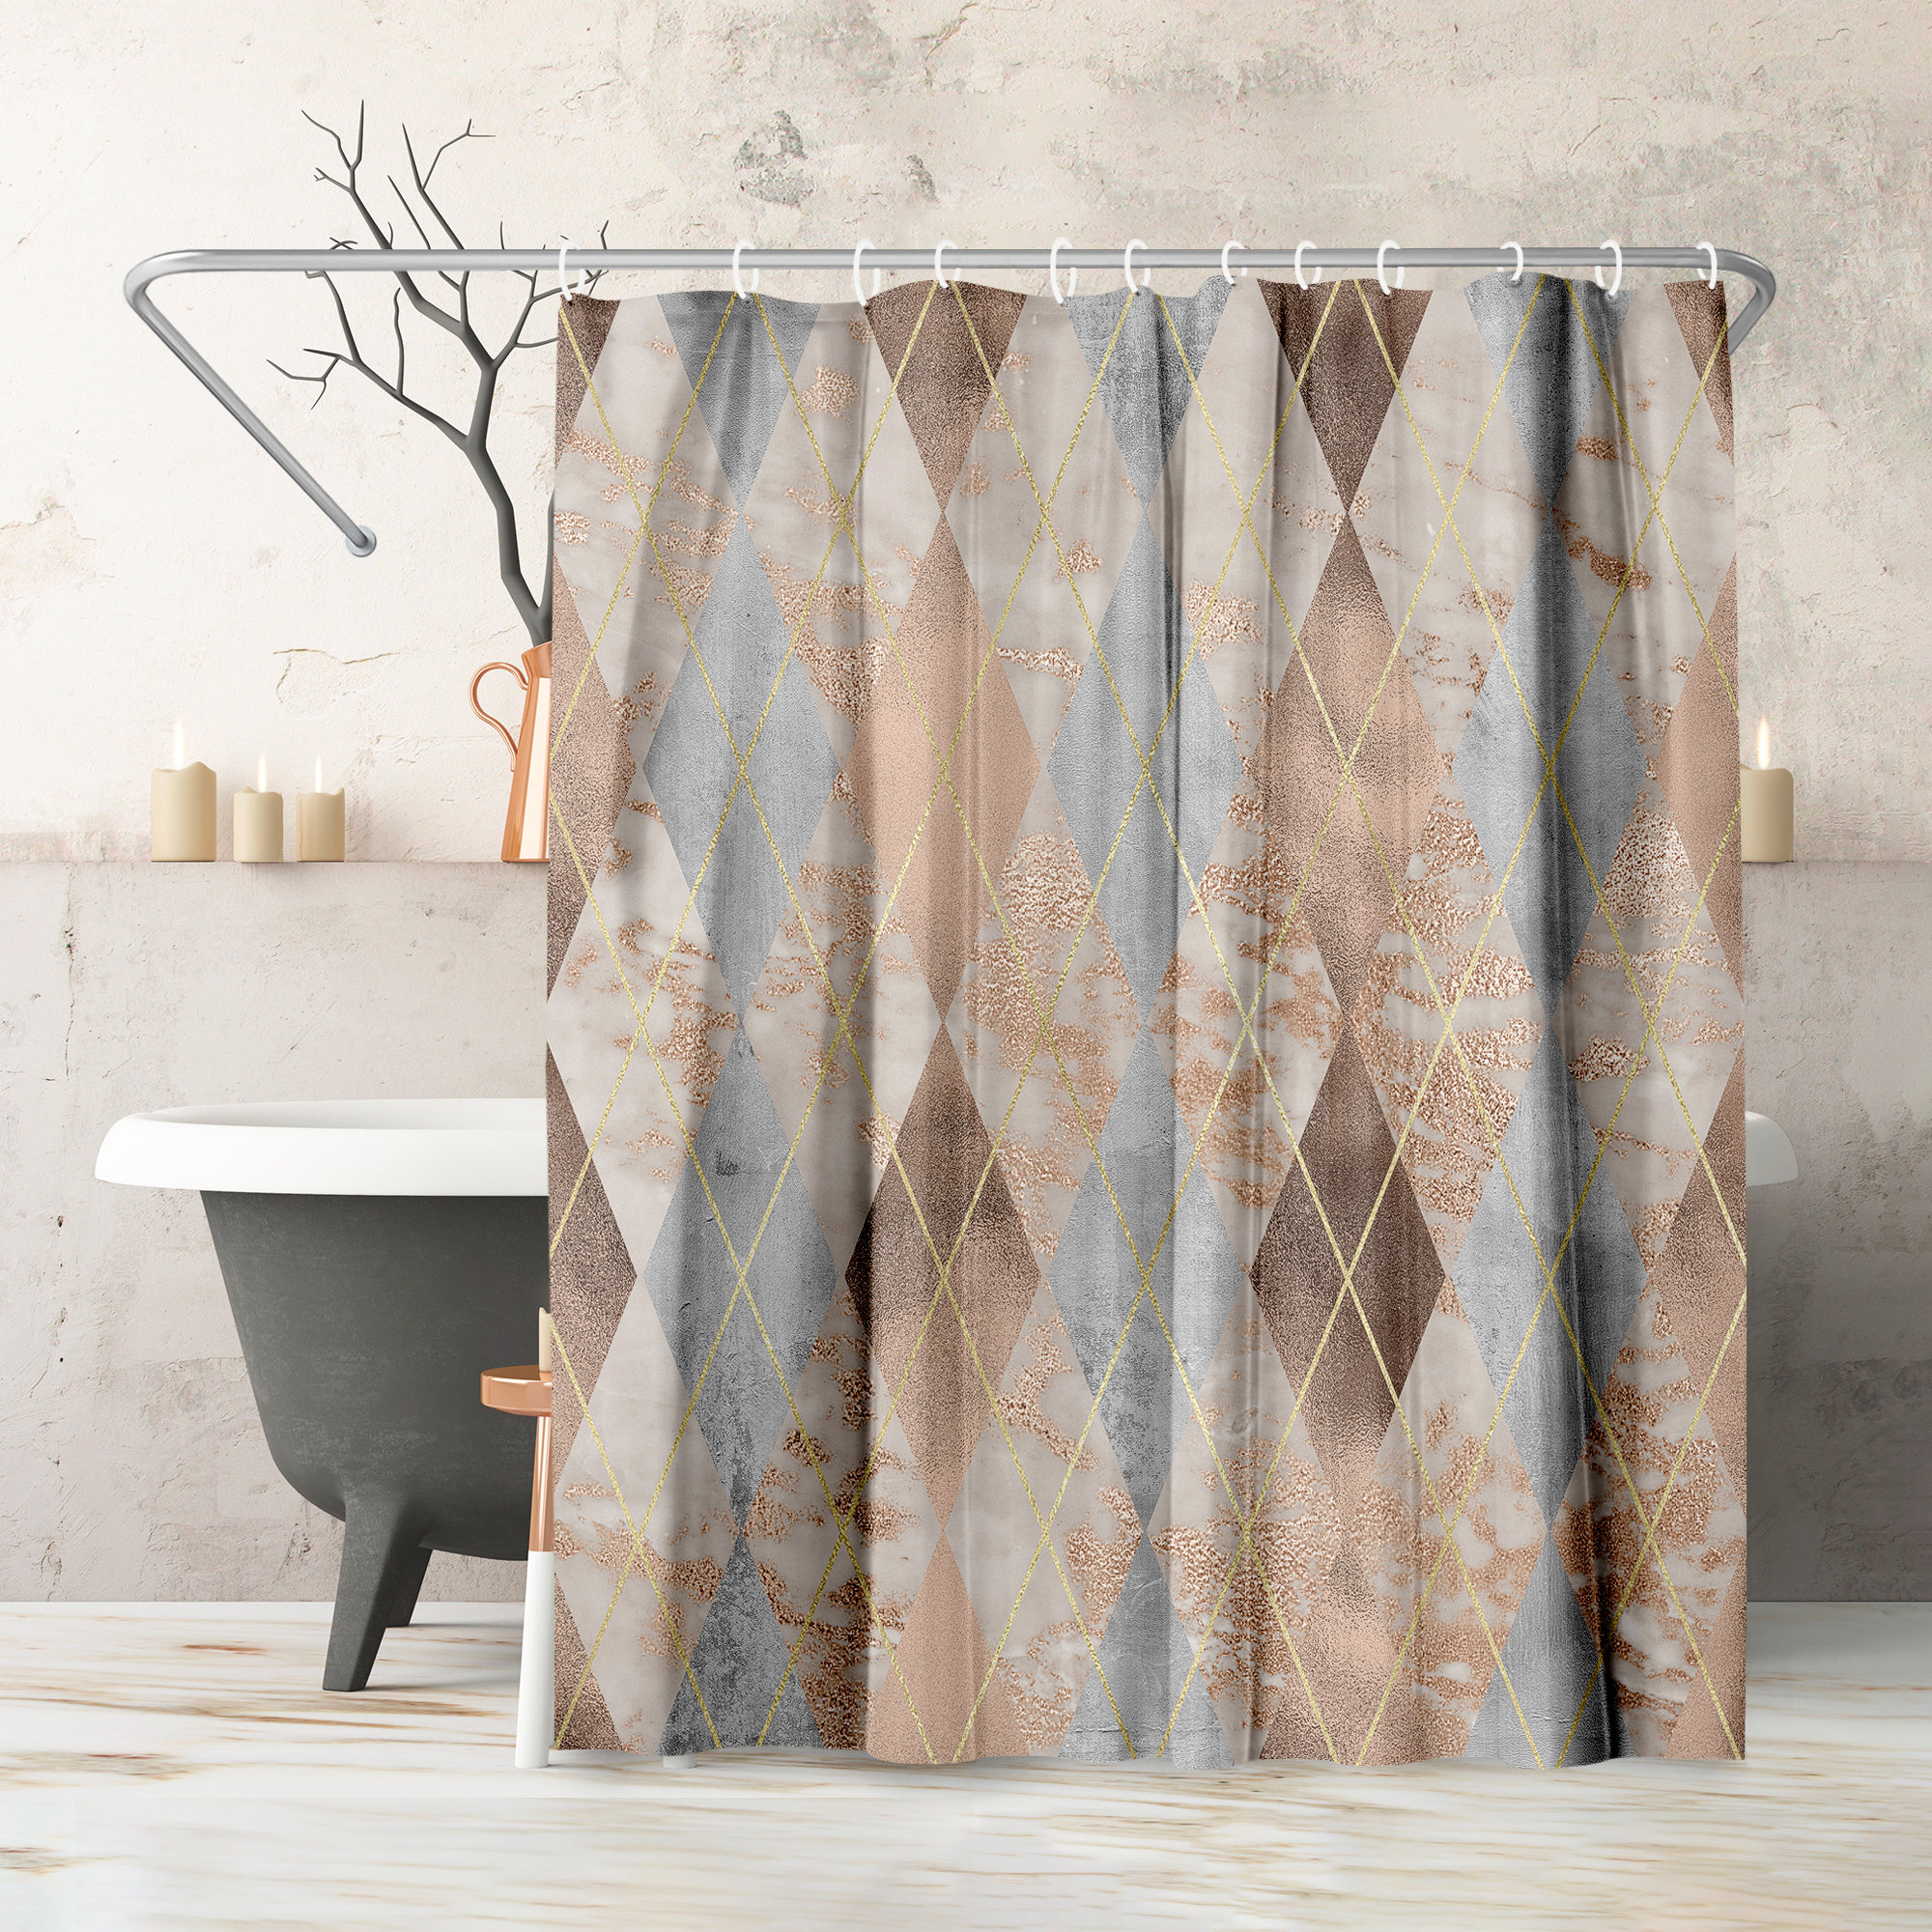 Abstract Shower Curtain Chic Rose Gold Marble Copper Argyle by Grab My Art East Urban Home